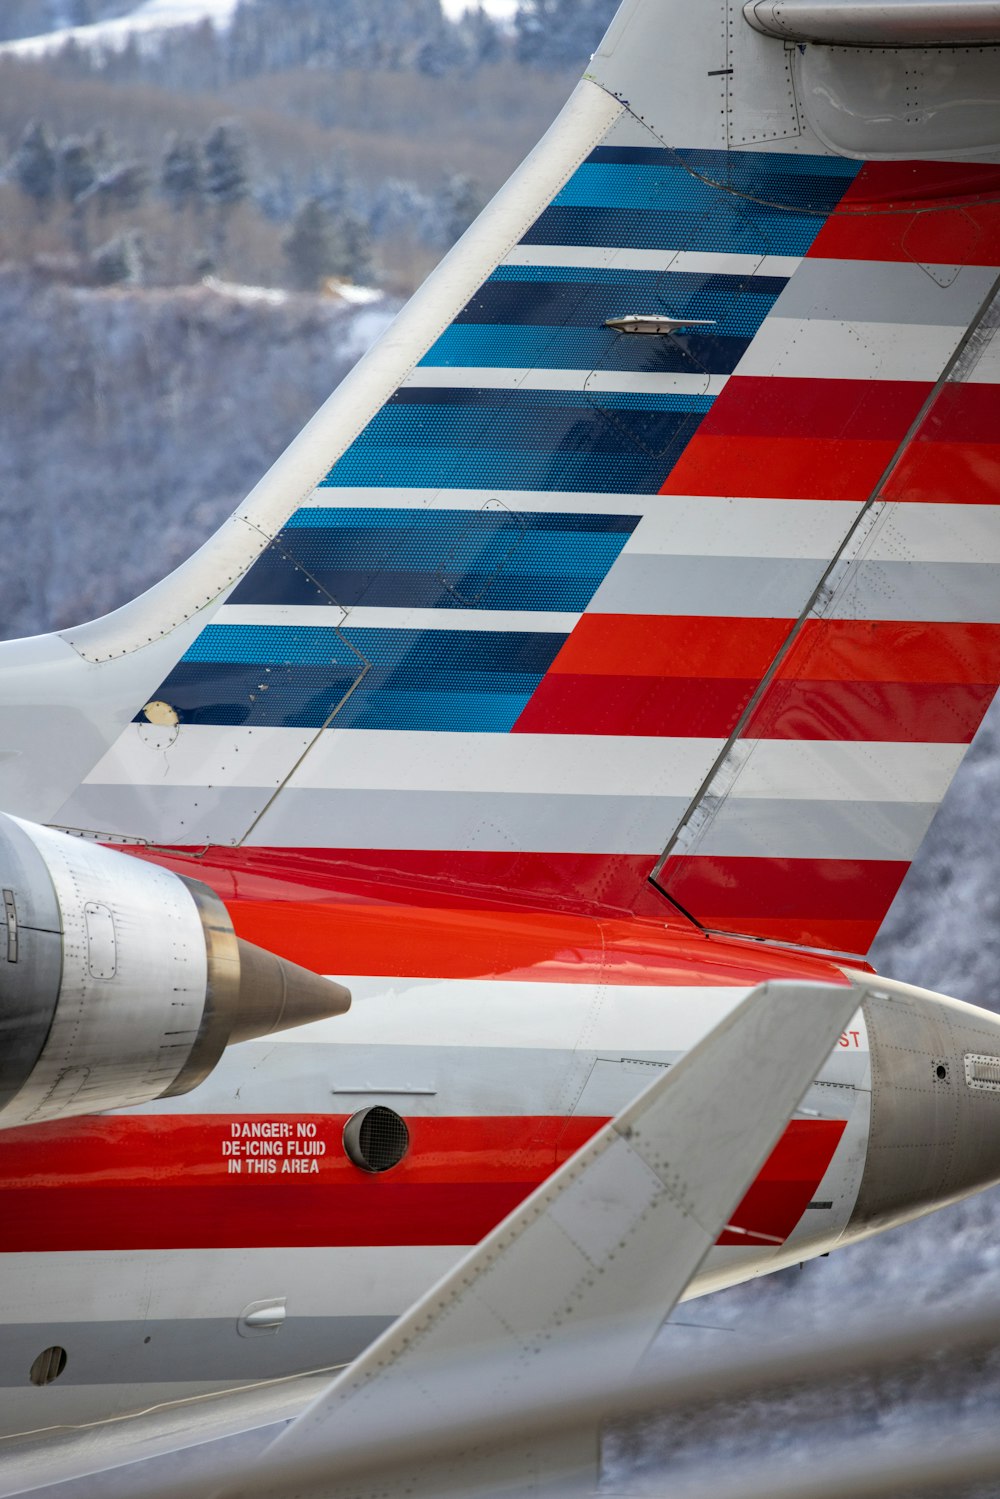 a close up of the tail end of an american airlines plane